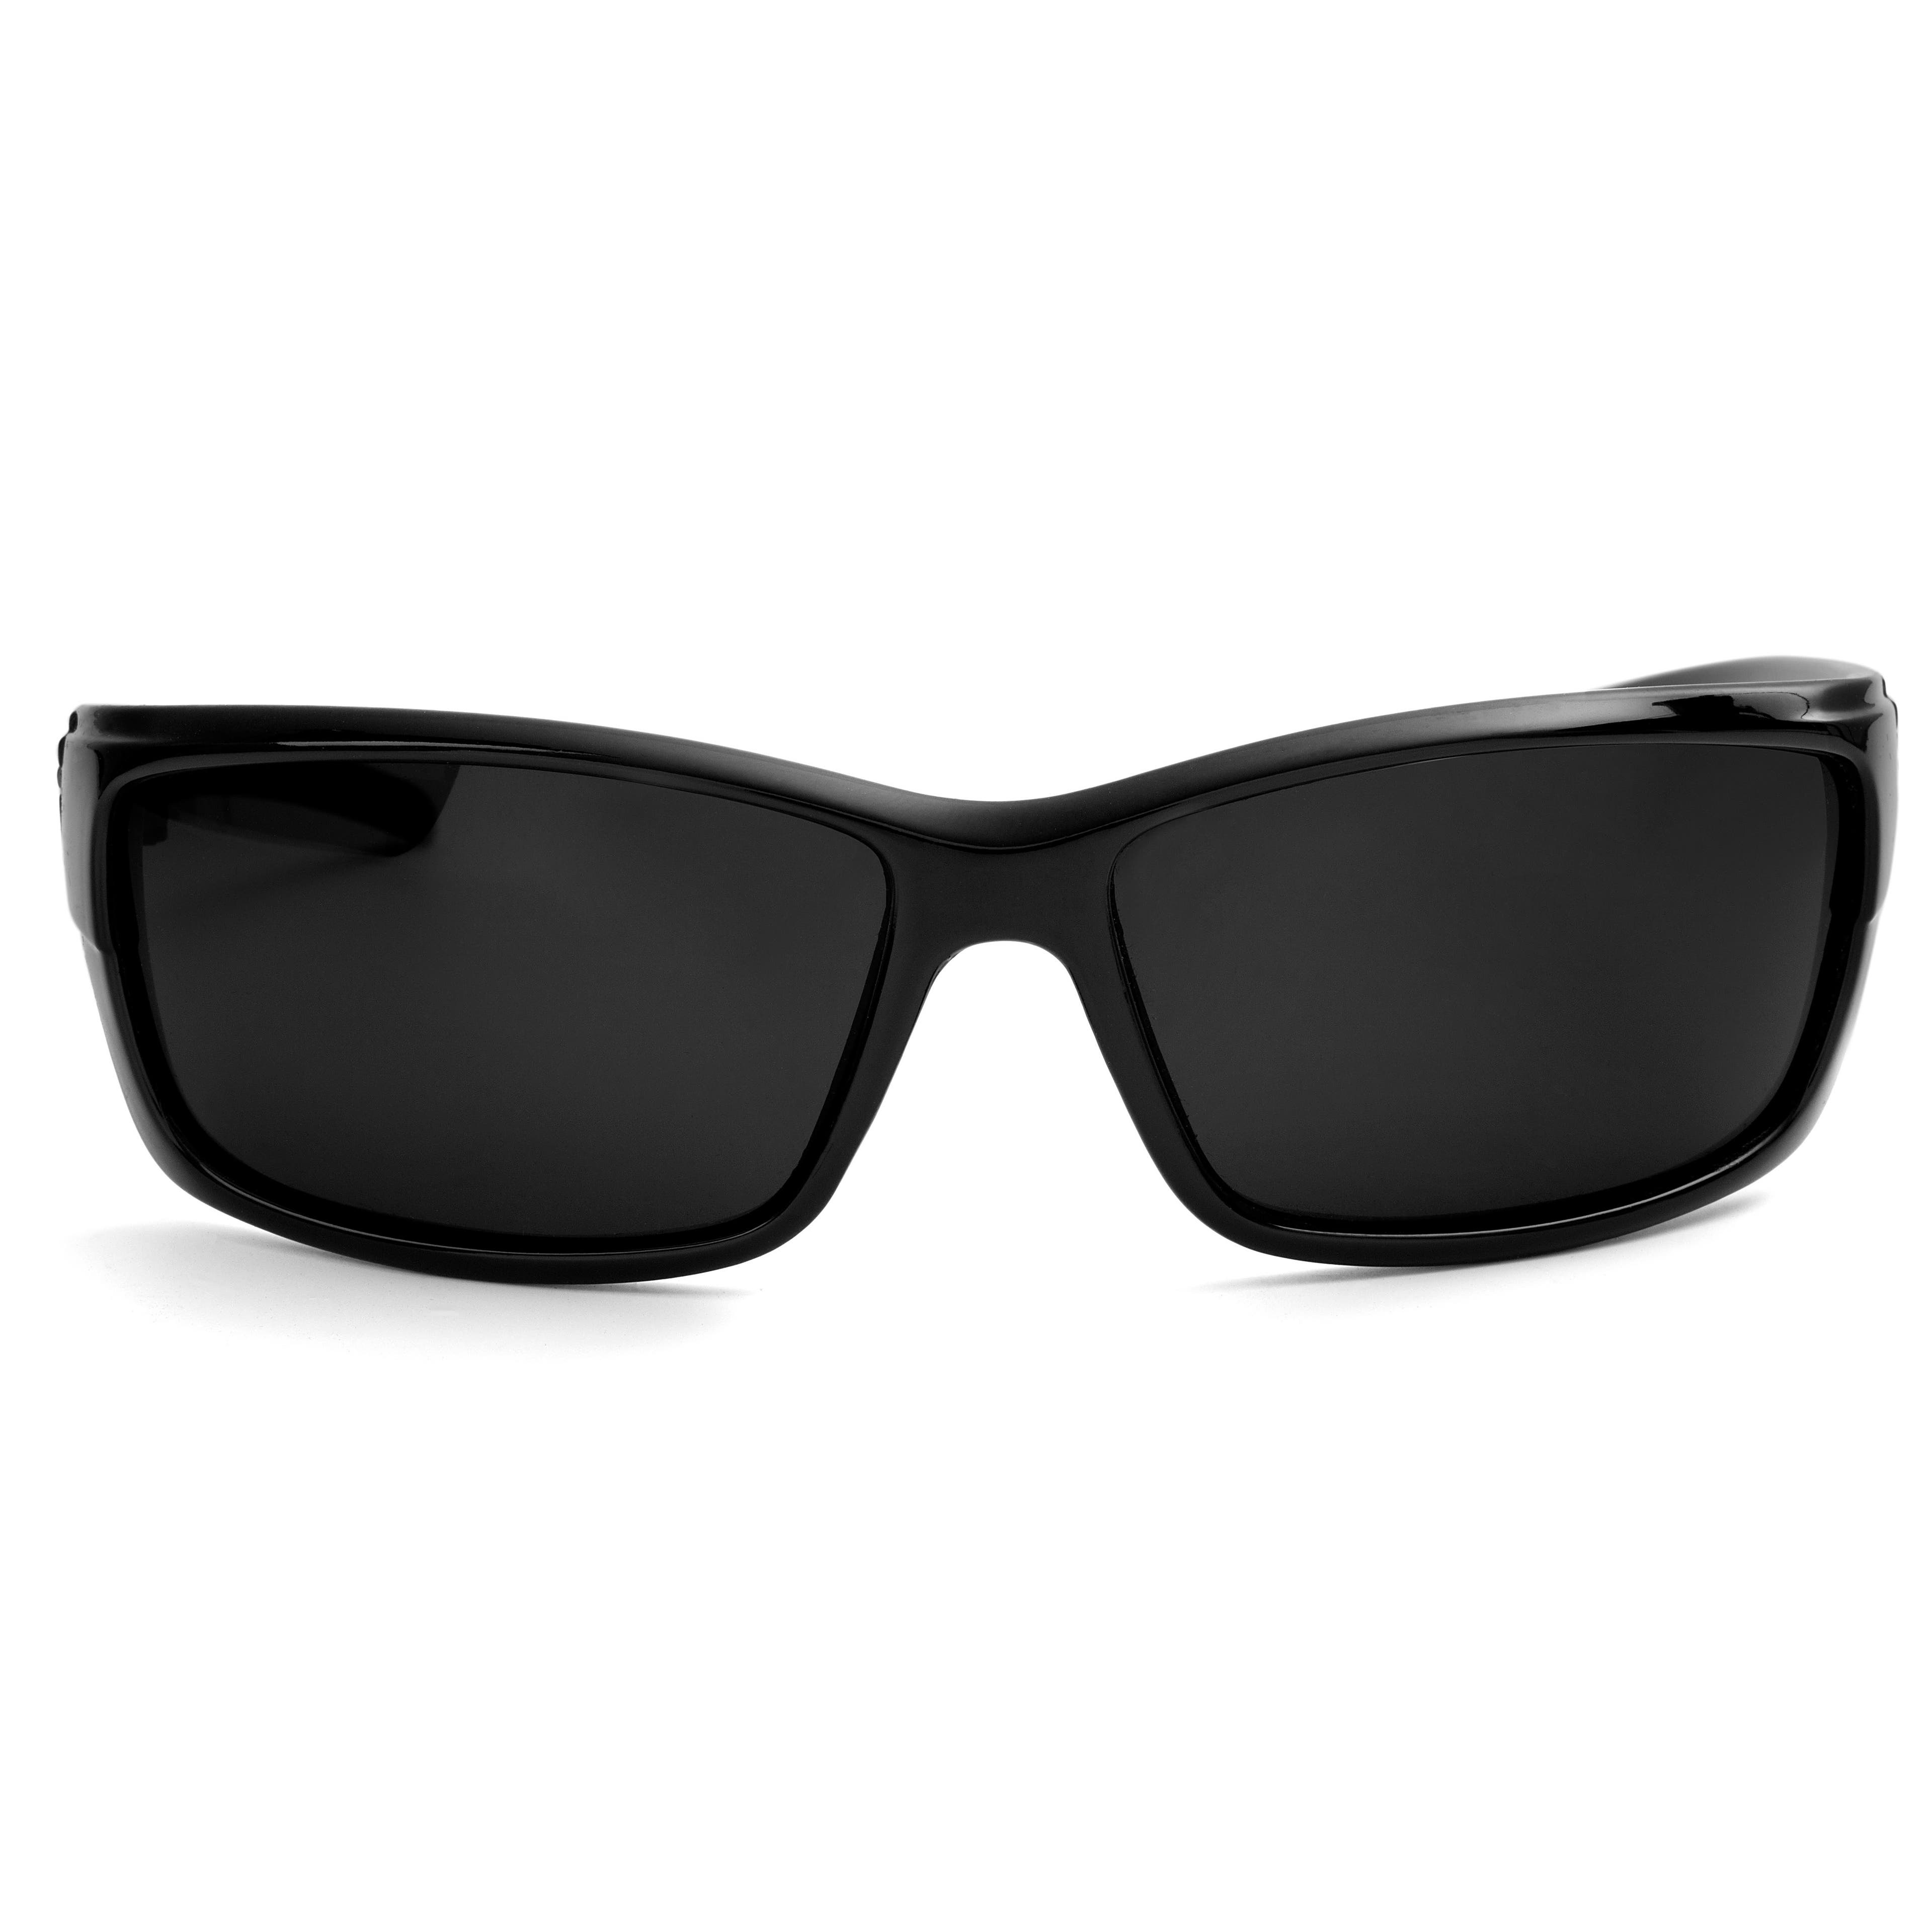 Sports sunglasses  18 Styles for men in stock